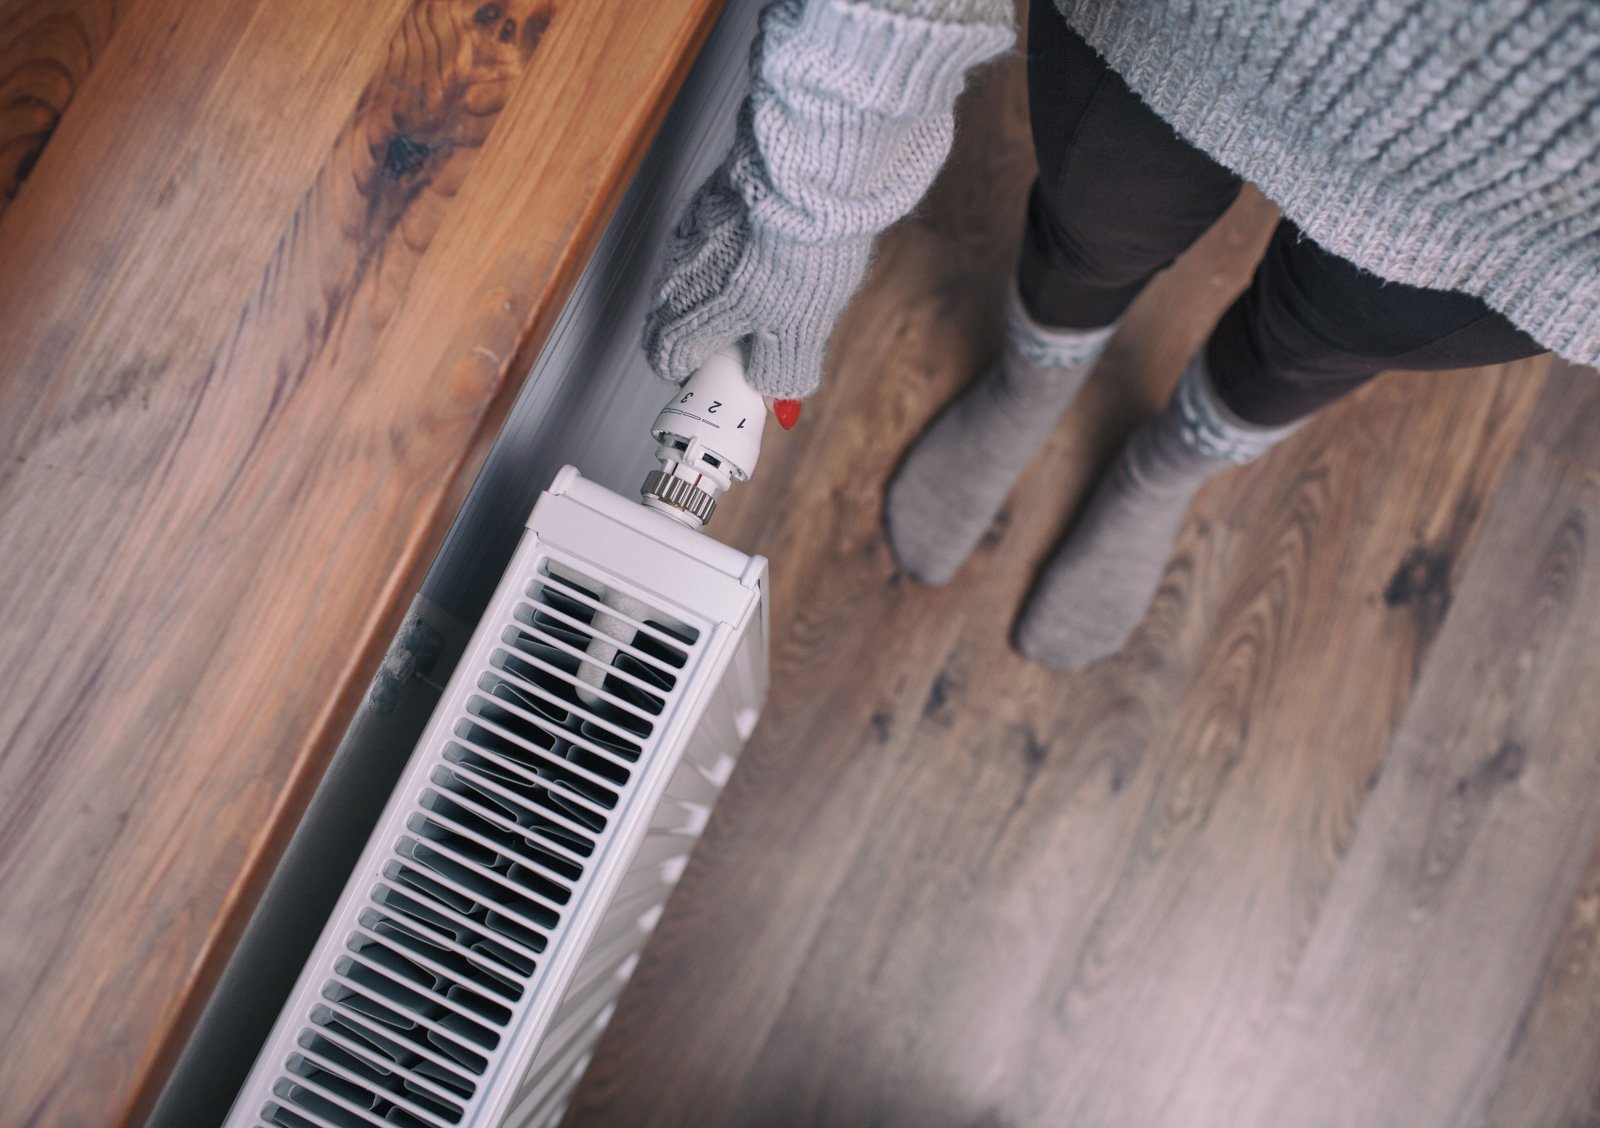 View from above of person wearing gray sweater, gloves, and tall socks, standing on wood floor while adjusting the temperature on a radiator.